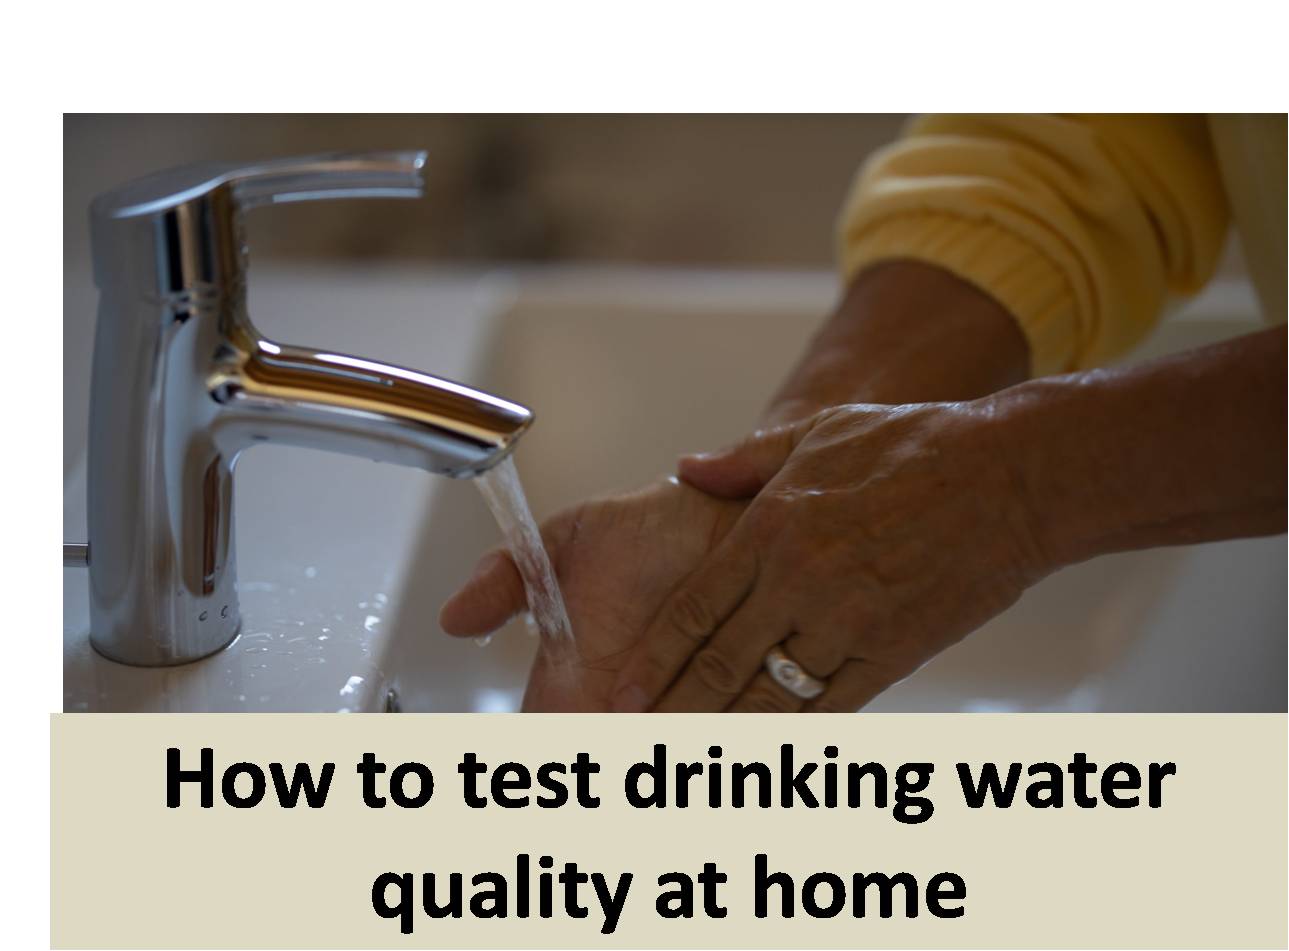 How to test drinking water quality at home